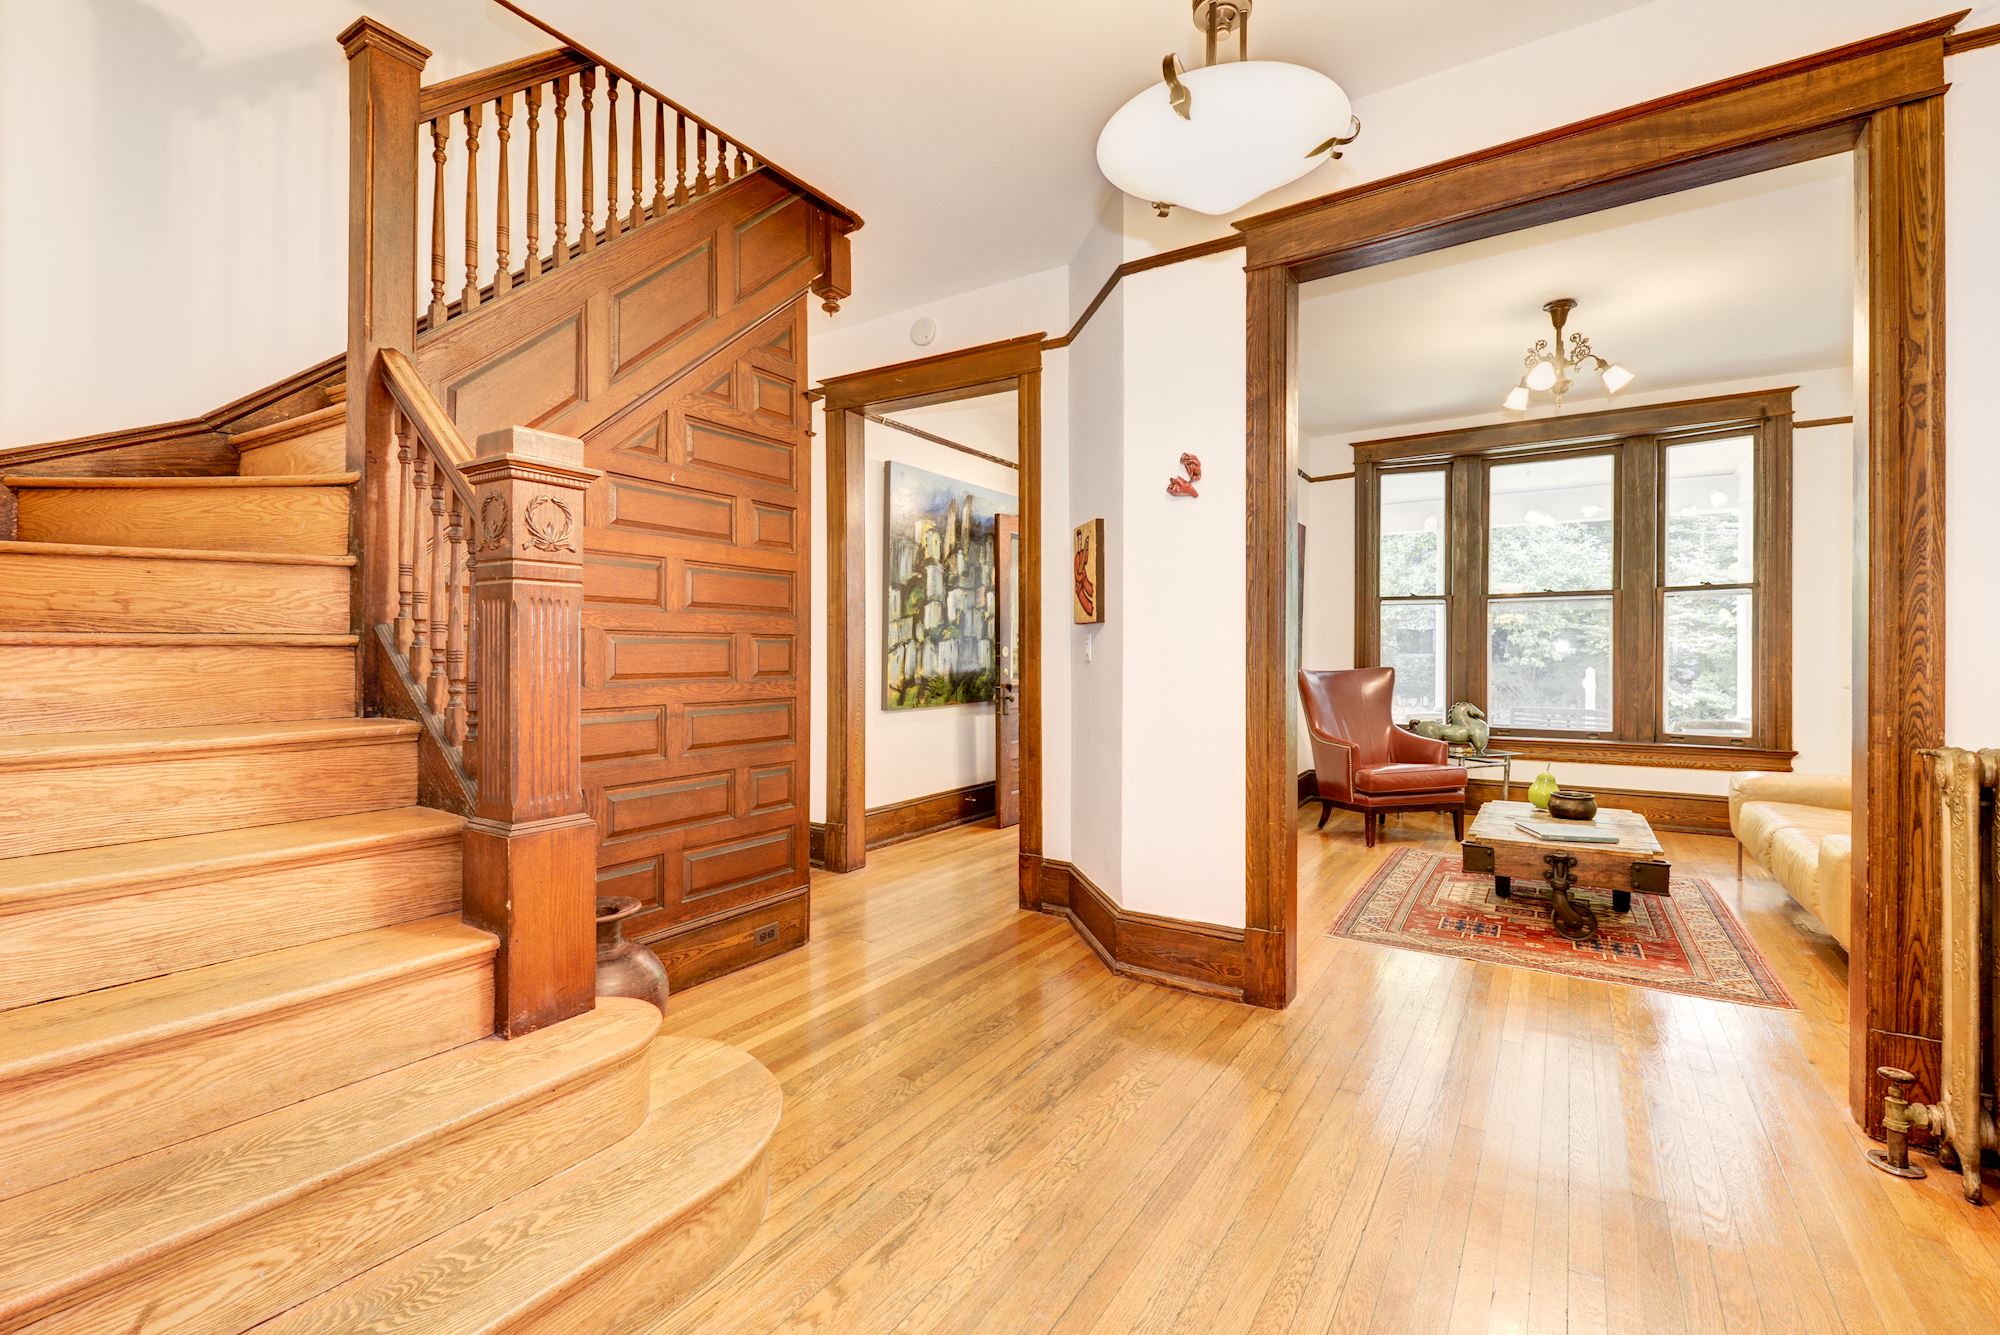 This home retains its gorgeous oak trim and paneled staircase.